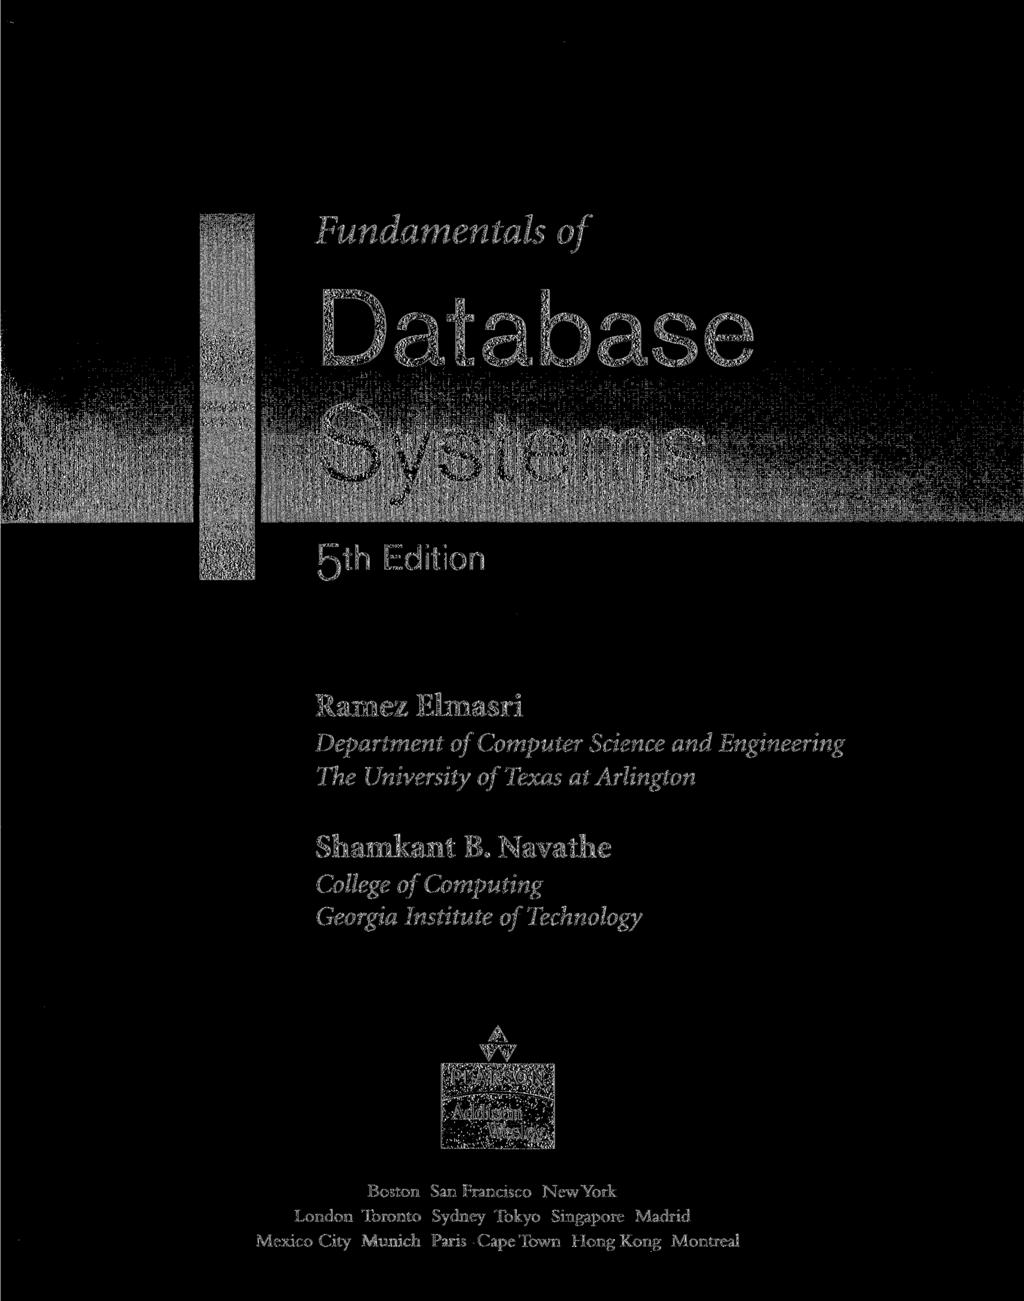 Fundamentals of Database Systems 5th Edition Ramez Elmasri Department of Computer Science and Engineering The University of Texas at Arlington Shamkant B.